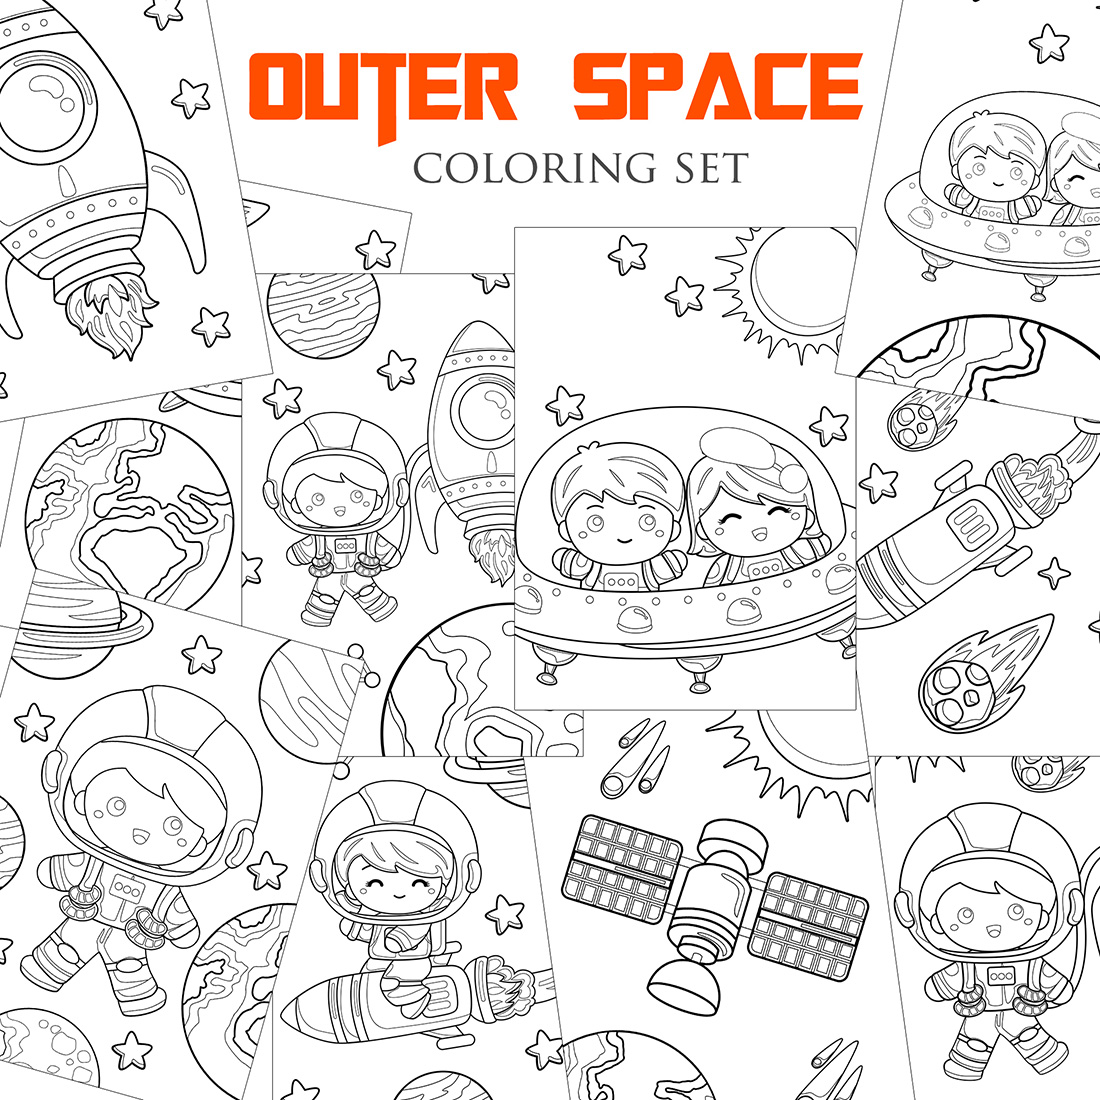 Solar System Outer Space Planet Astronaut Coloring Pages Activity For Kids And Adult cover image.